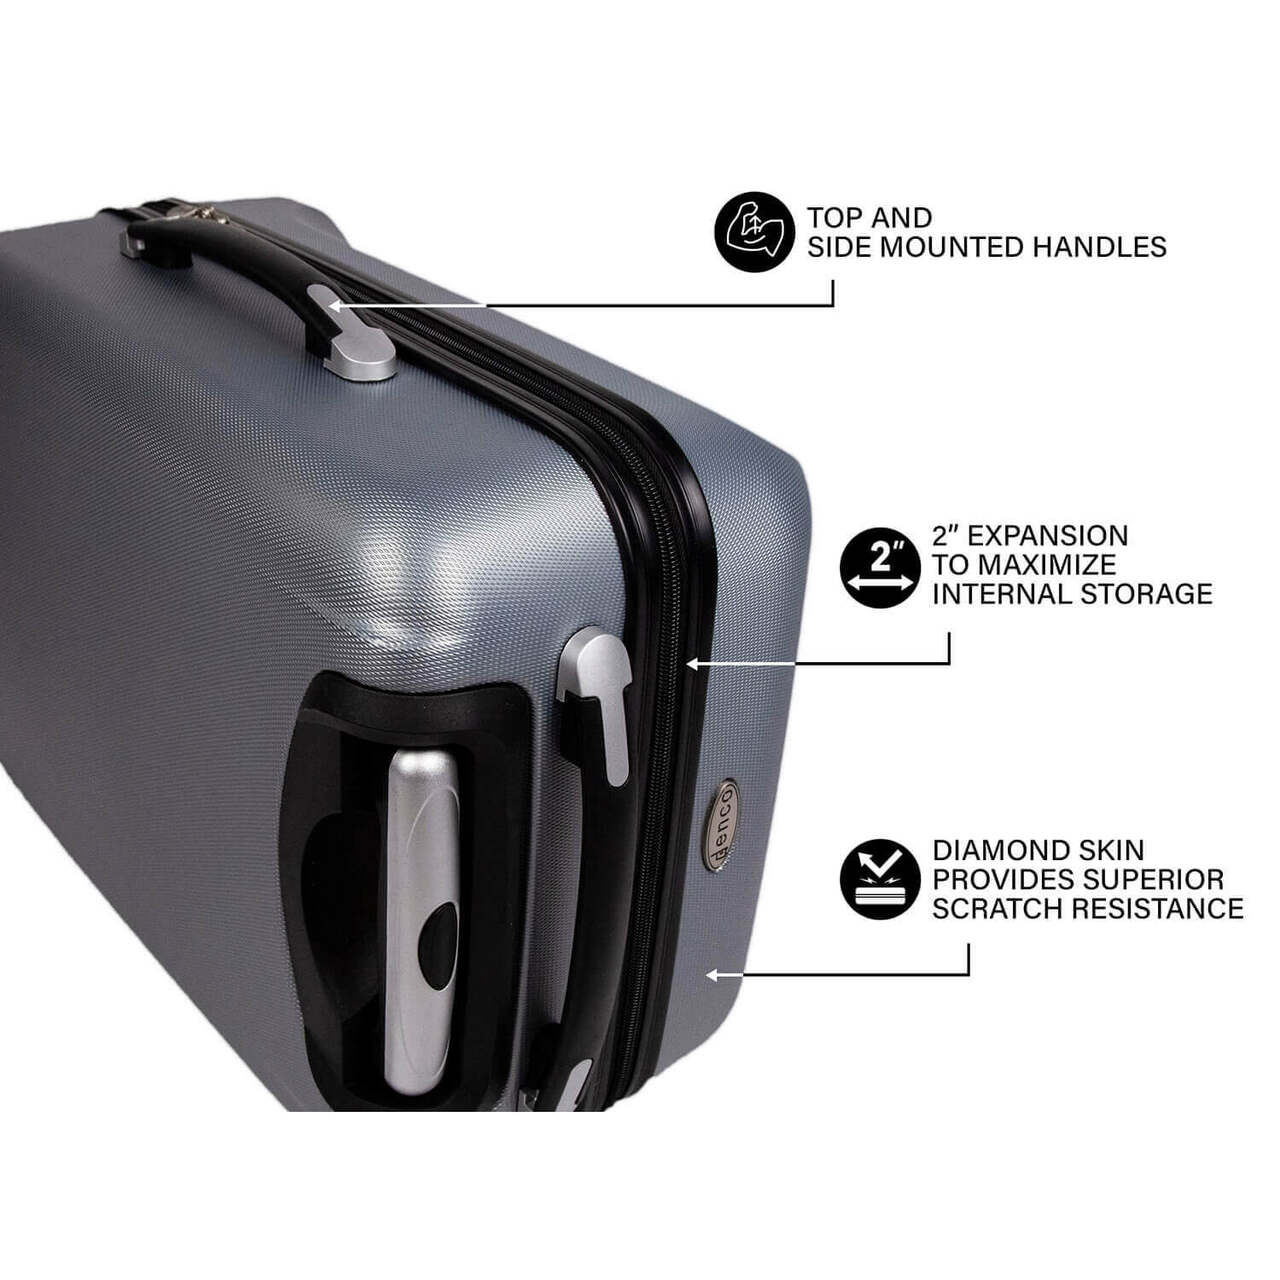 Washington Wizards 20" Silver Domestic Carry-on Spinner